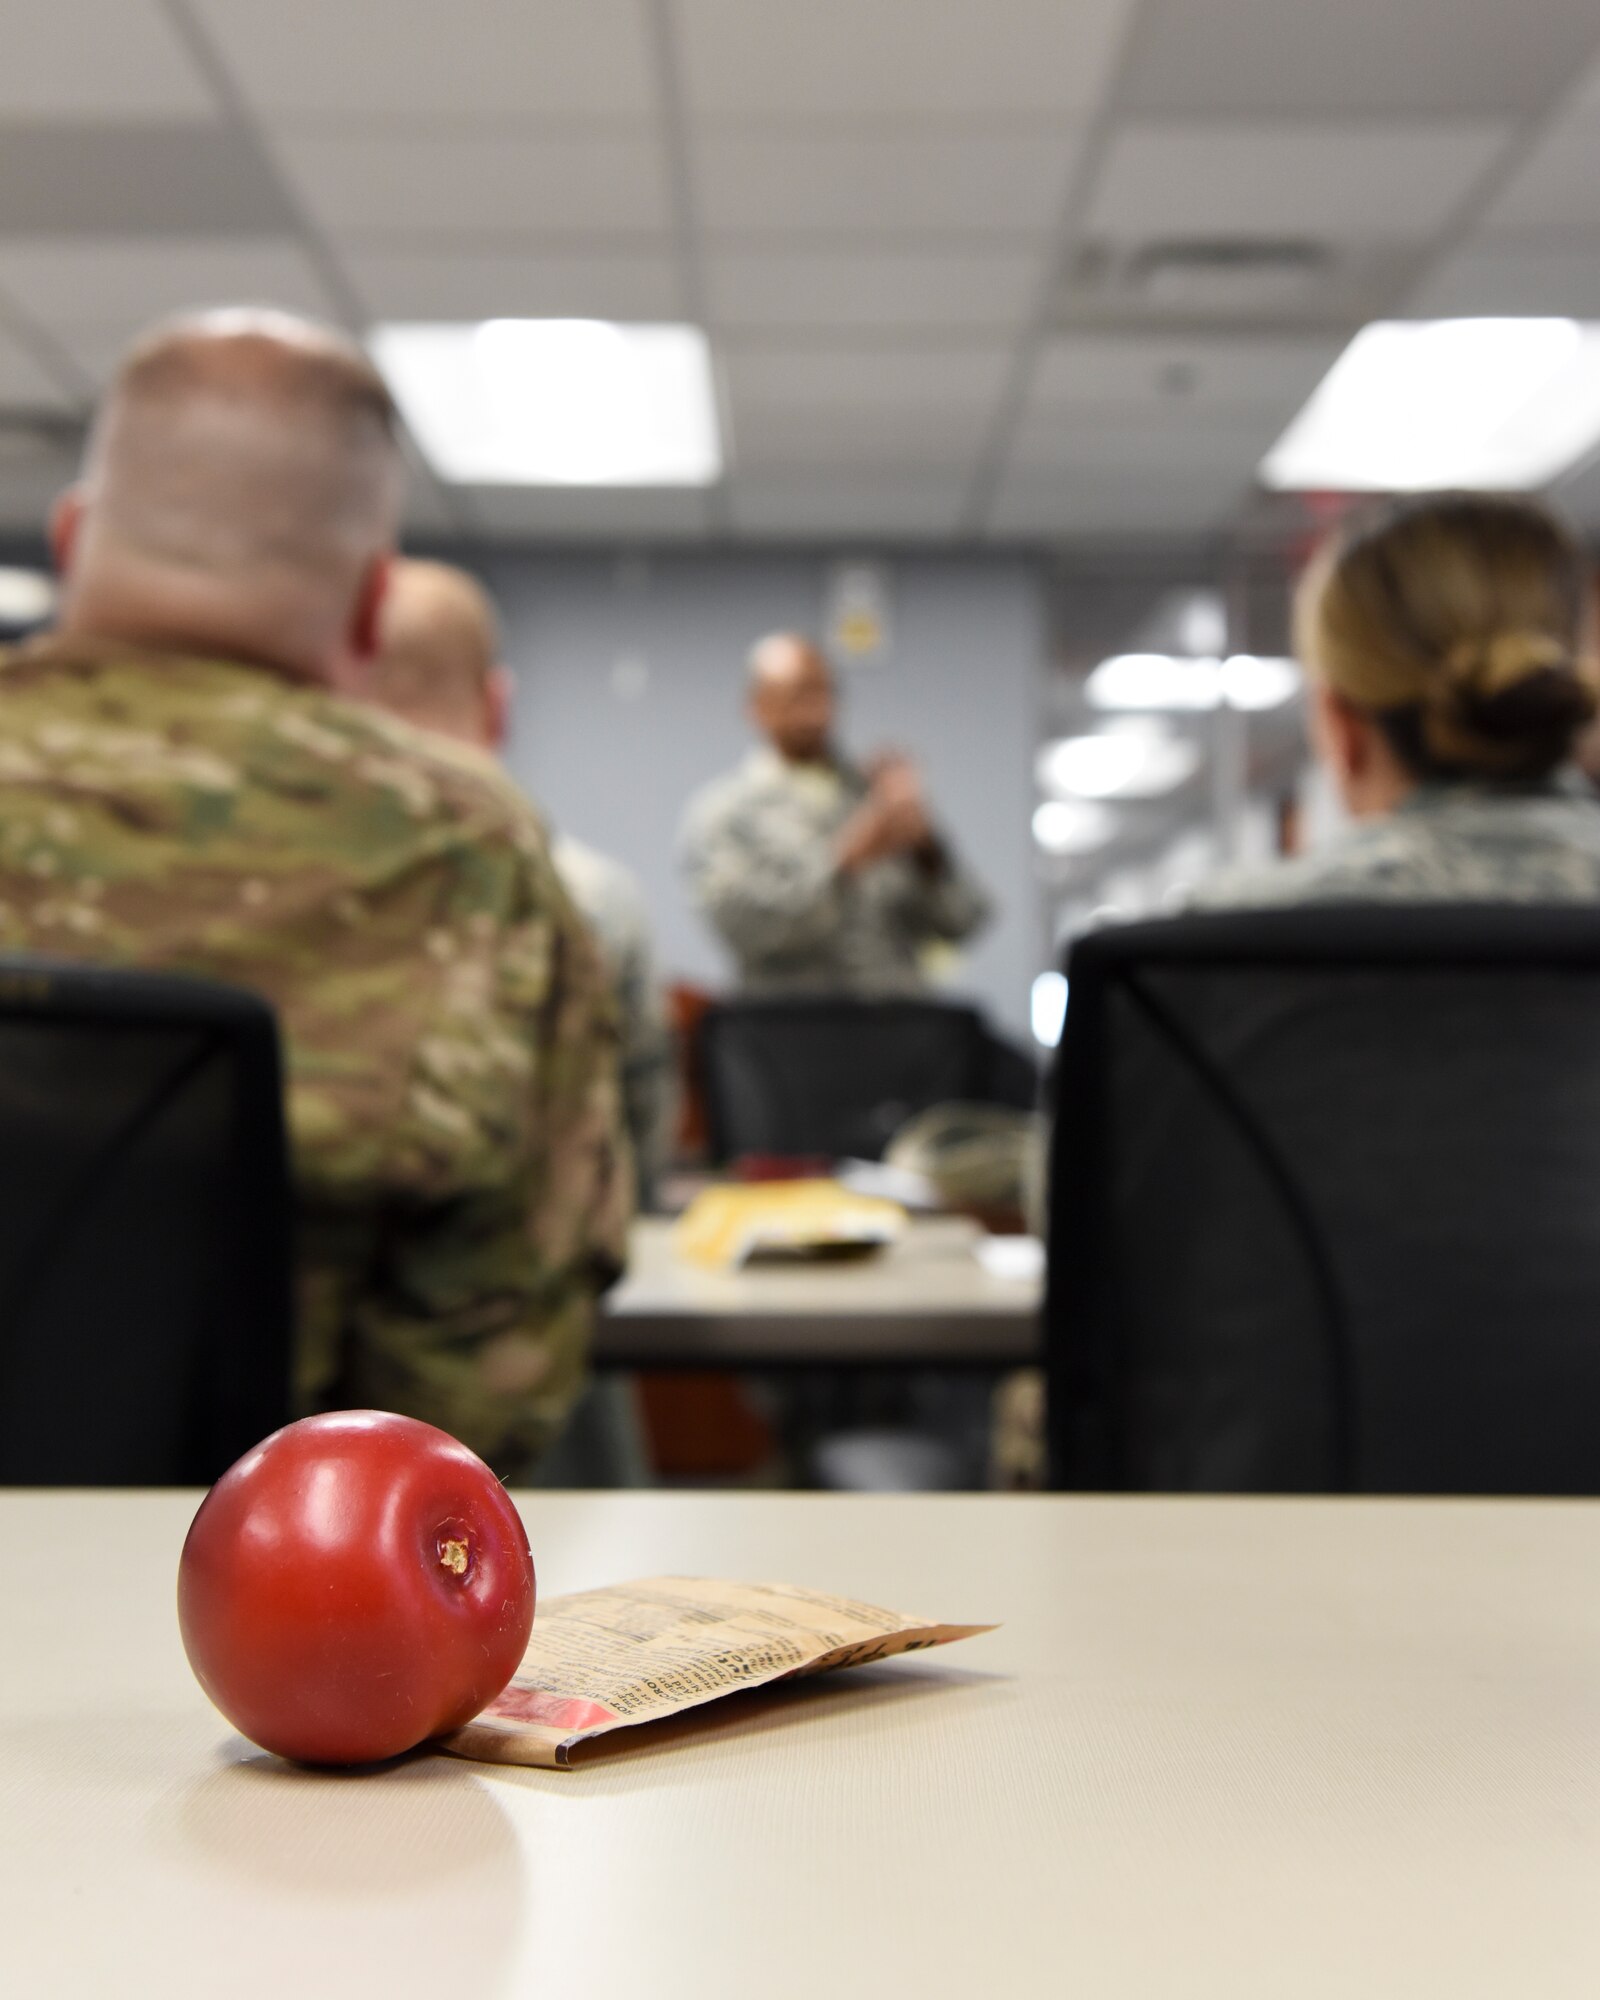 Examples of healthy food choicecs sit on a desk during the Better Nutrition segment of the Better Body. Better Life. course at the Pittsburgh International Airport Air Reserve Station, Pennsylvania, June 5, 2019. The course is taught by Tech. Sgt. Bryson Manker, diet therapist with the 911th Aeromedical Staging Squadron, who hopes to help others gain a better understanding of overall nutrition. (U.S. Air Force photo by Staff Sgt. Beth Kobily)